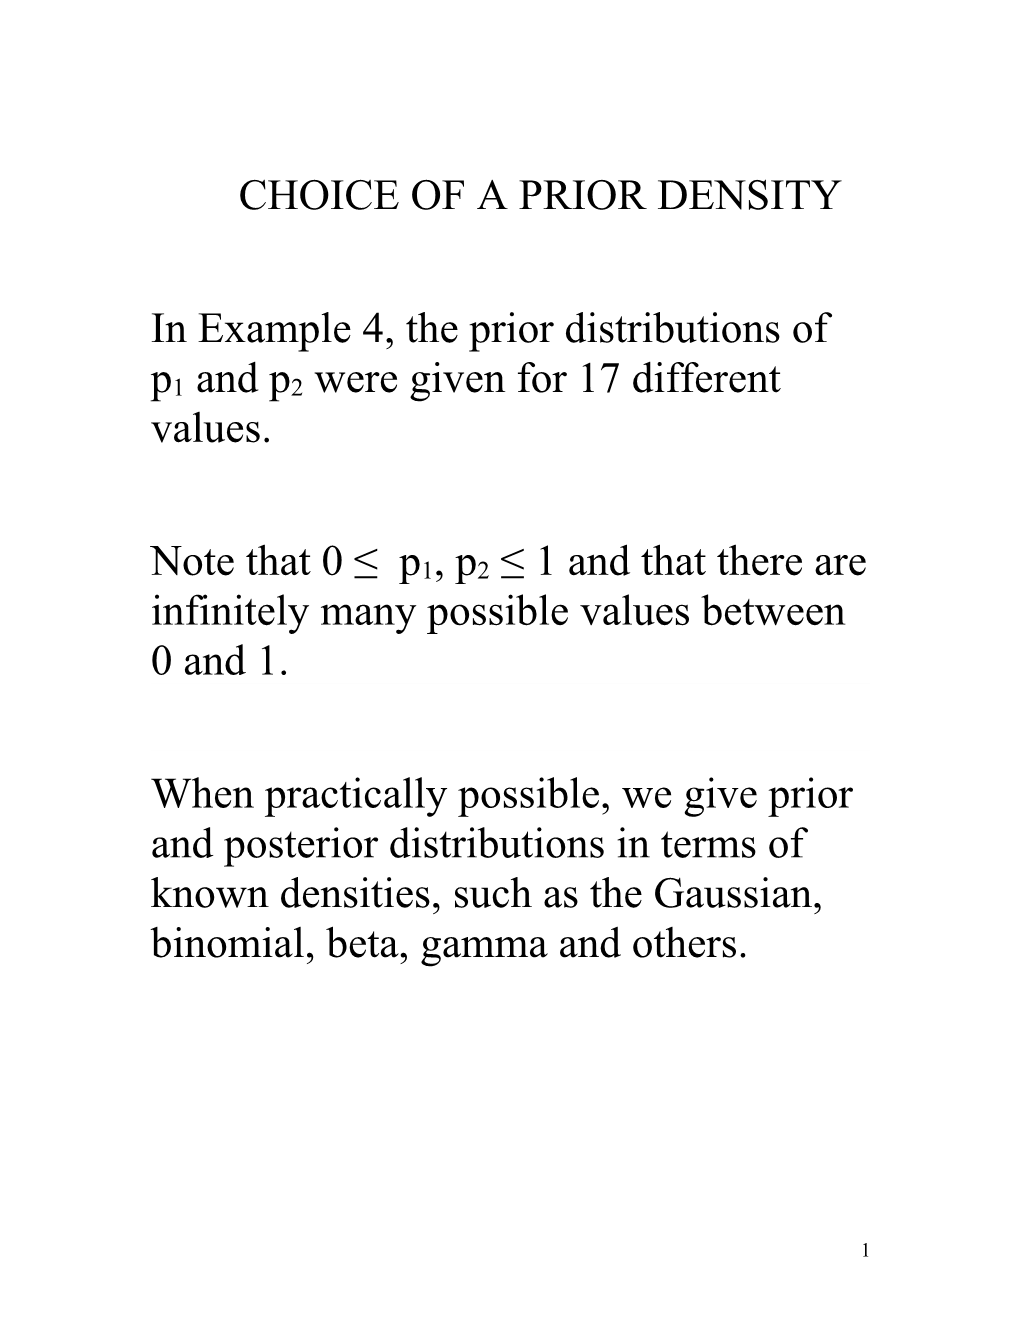 In Example 4, the Prior Distributions of P1 and P2 Were Given for 17 Different Values